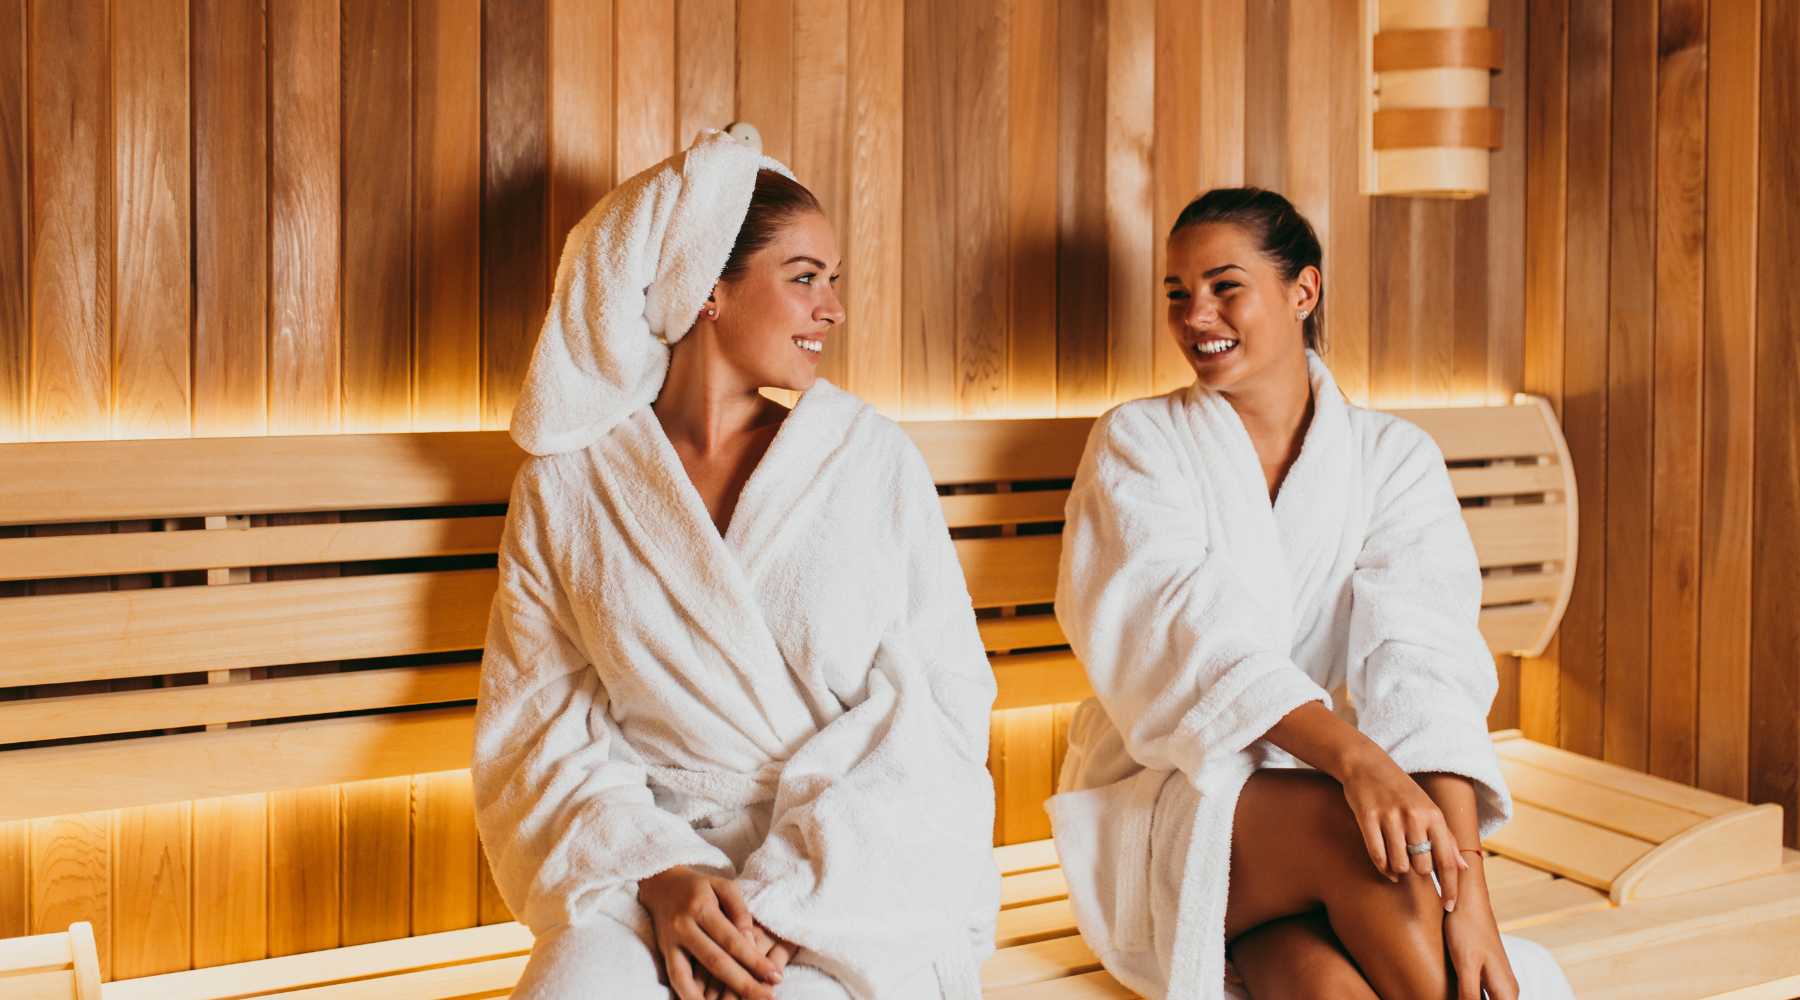 The best guide to choosing the right sauna room for your home